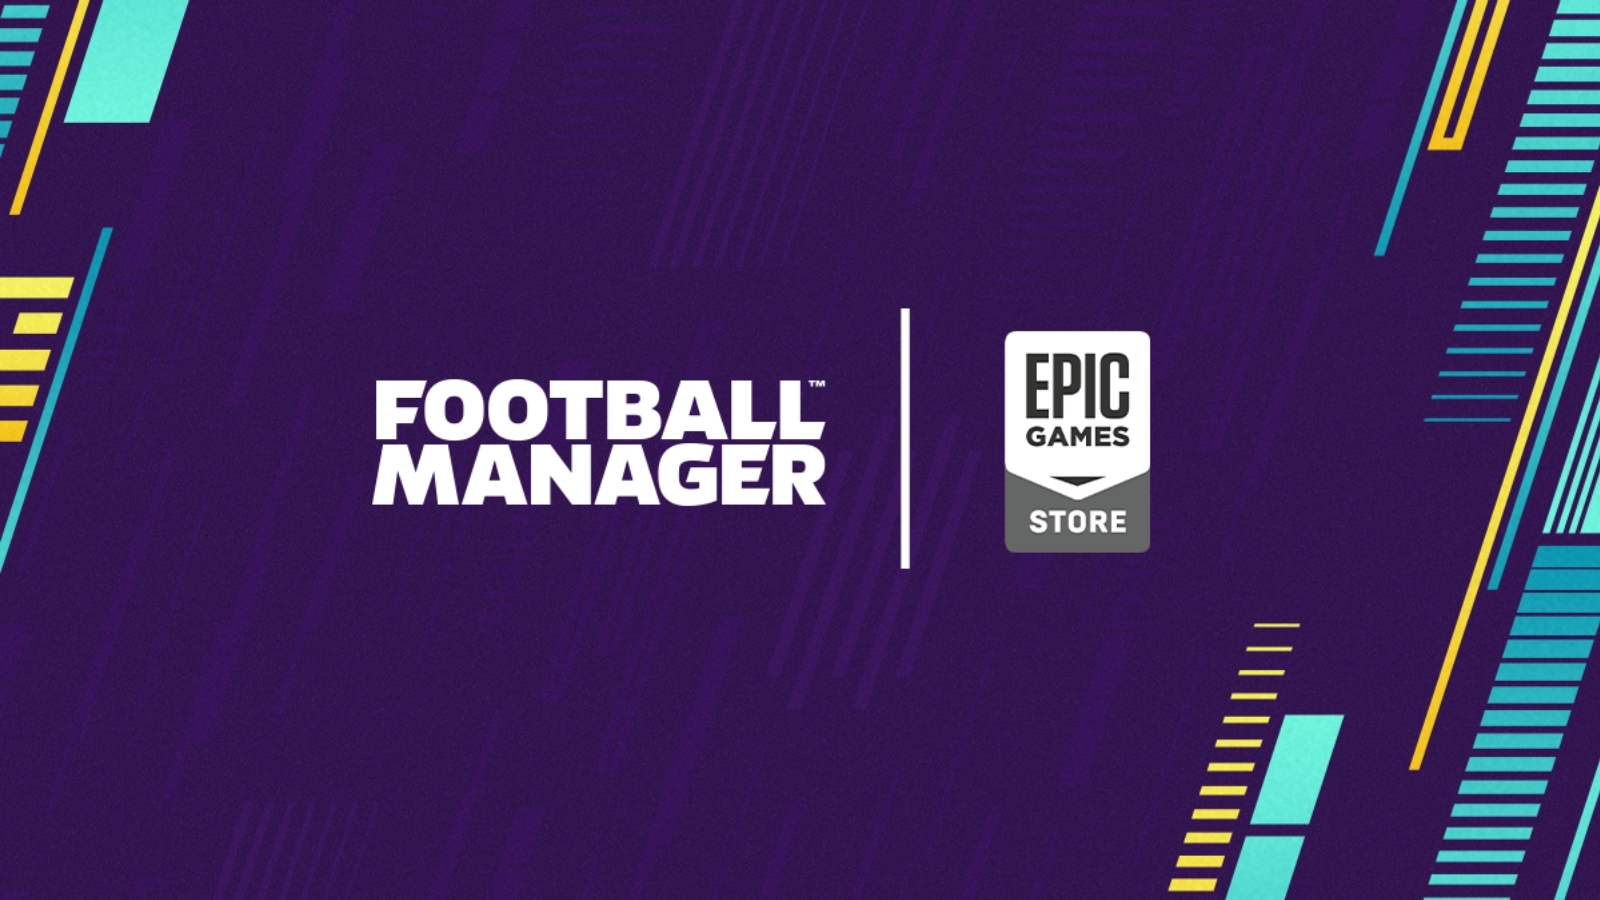 how long is the season in football manager 2017 demo